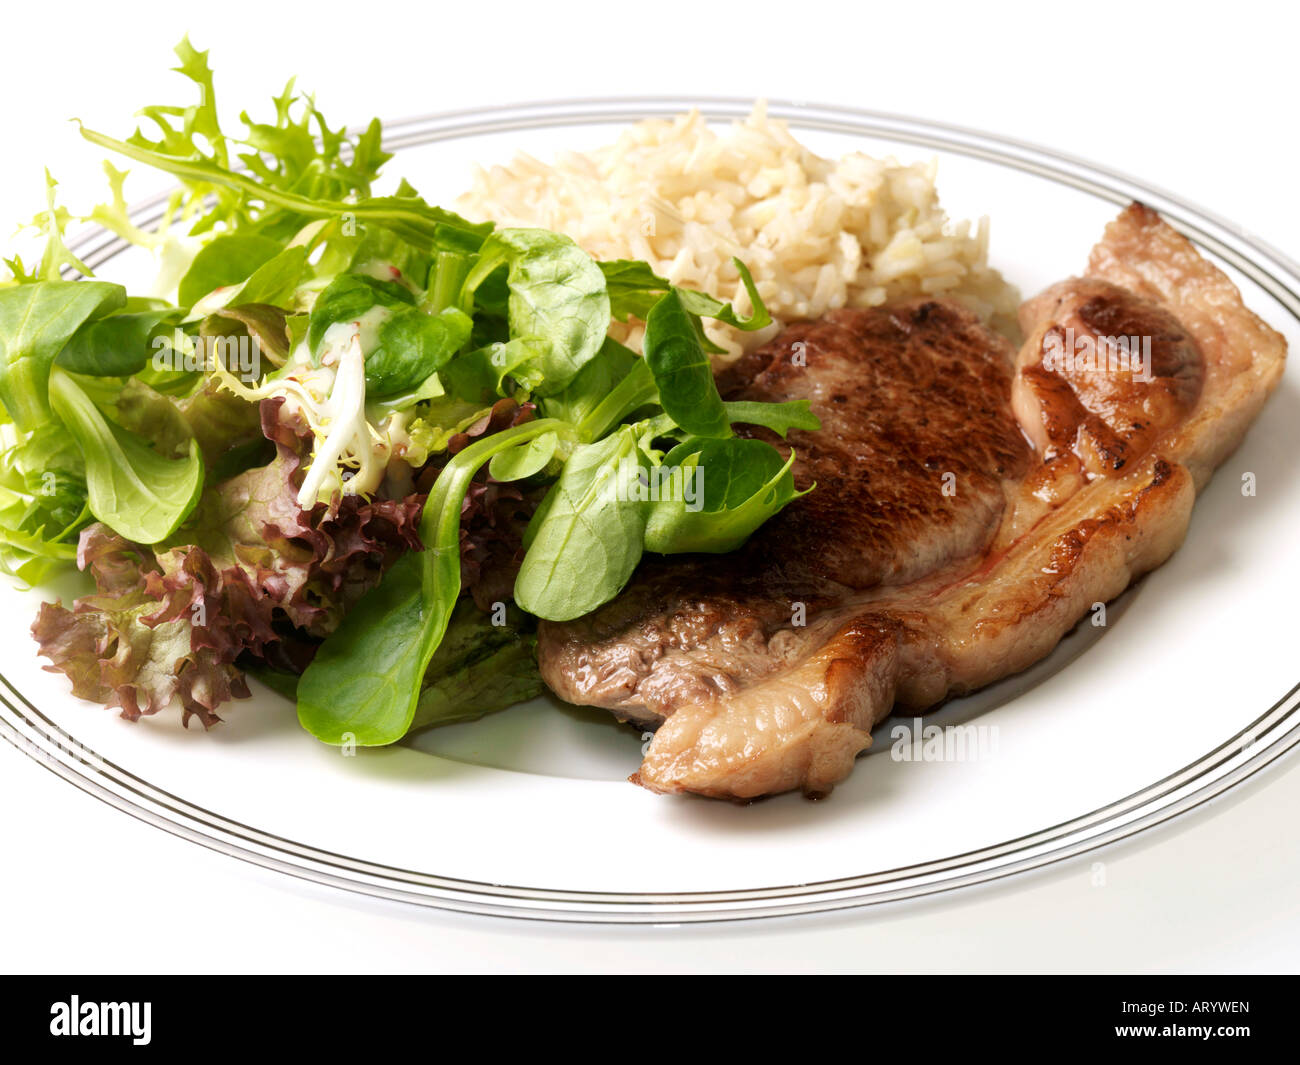 Fresh Lean Rump Beef Steak With Brown Rice and Salad Isolated Against A White Background With A Clipping Path And No People Stock Photo